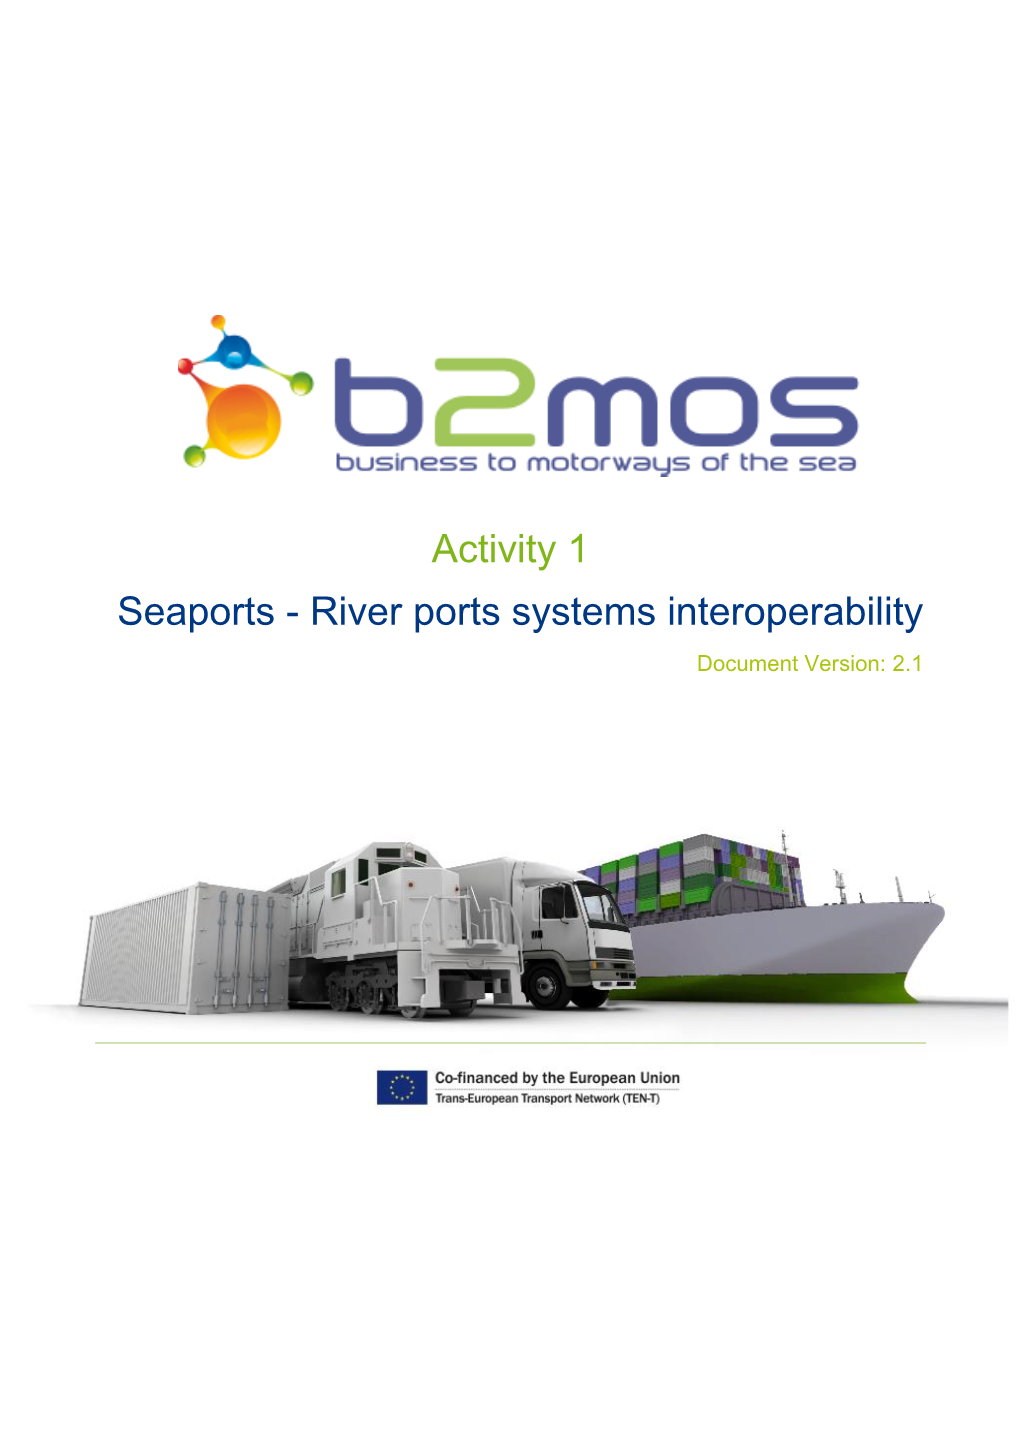 Activity 1 Seaports - River Ports Systems Interoperability Document Version: 2.1